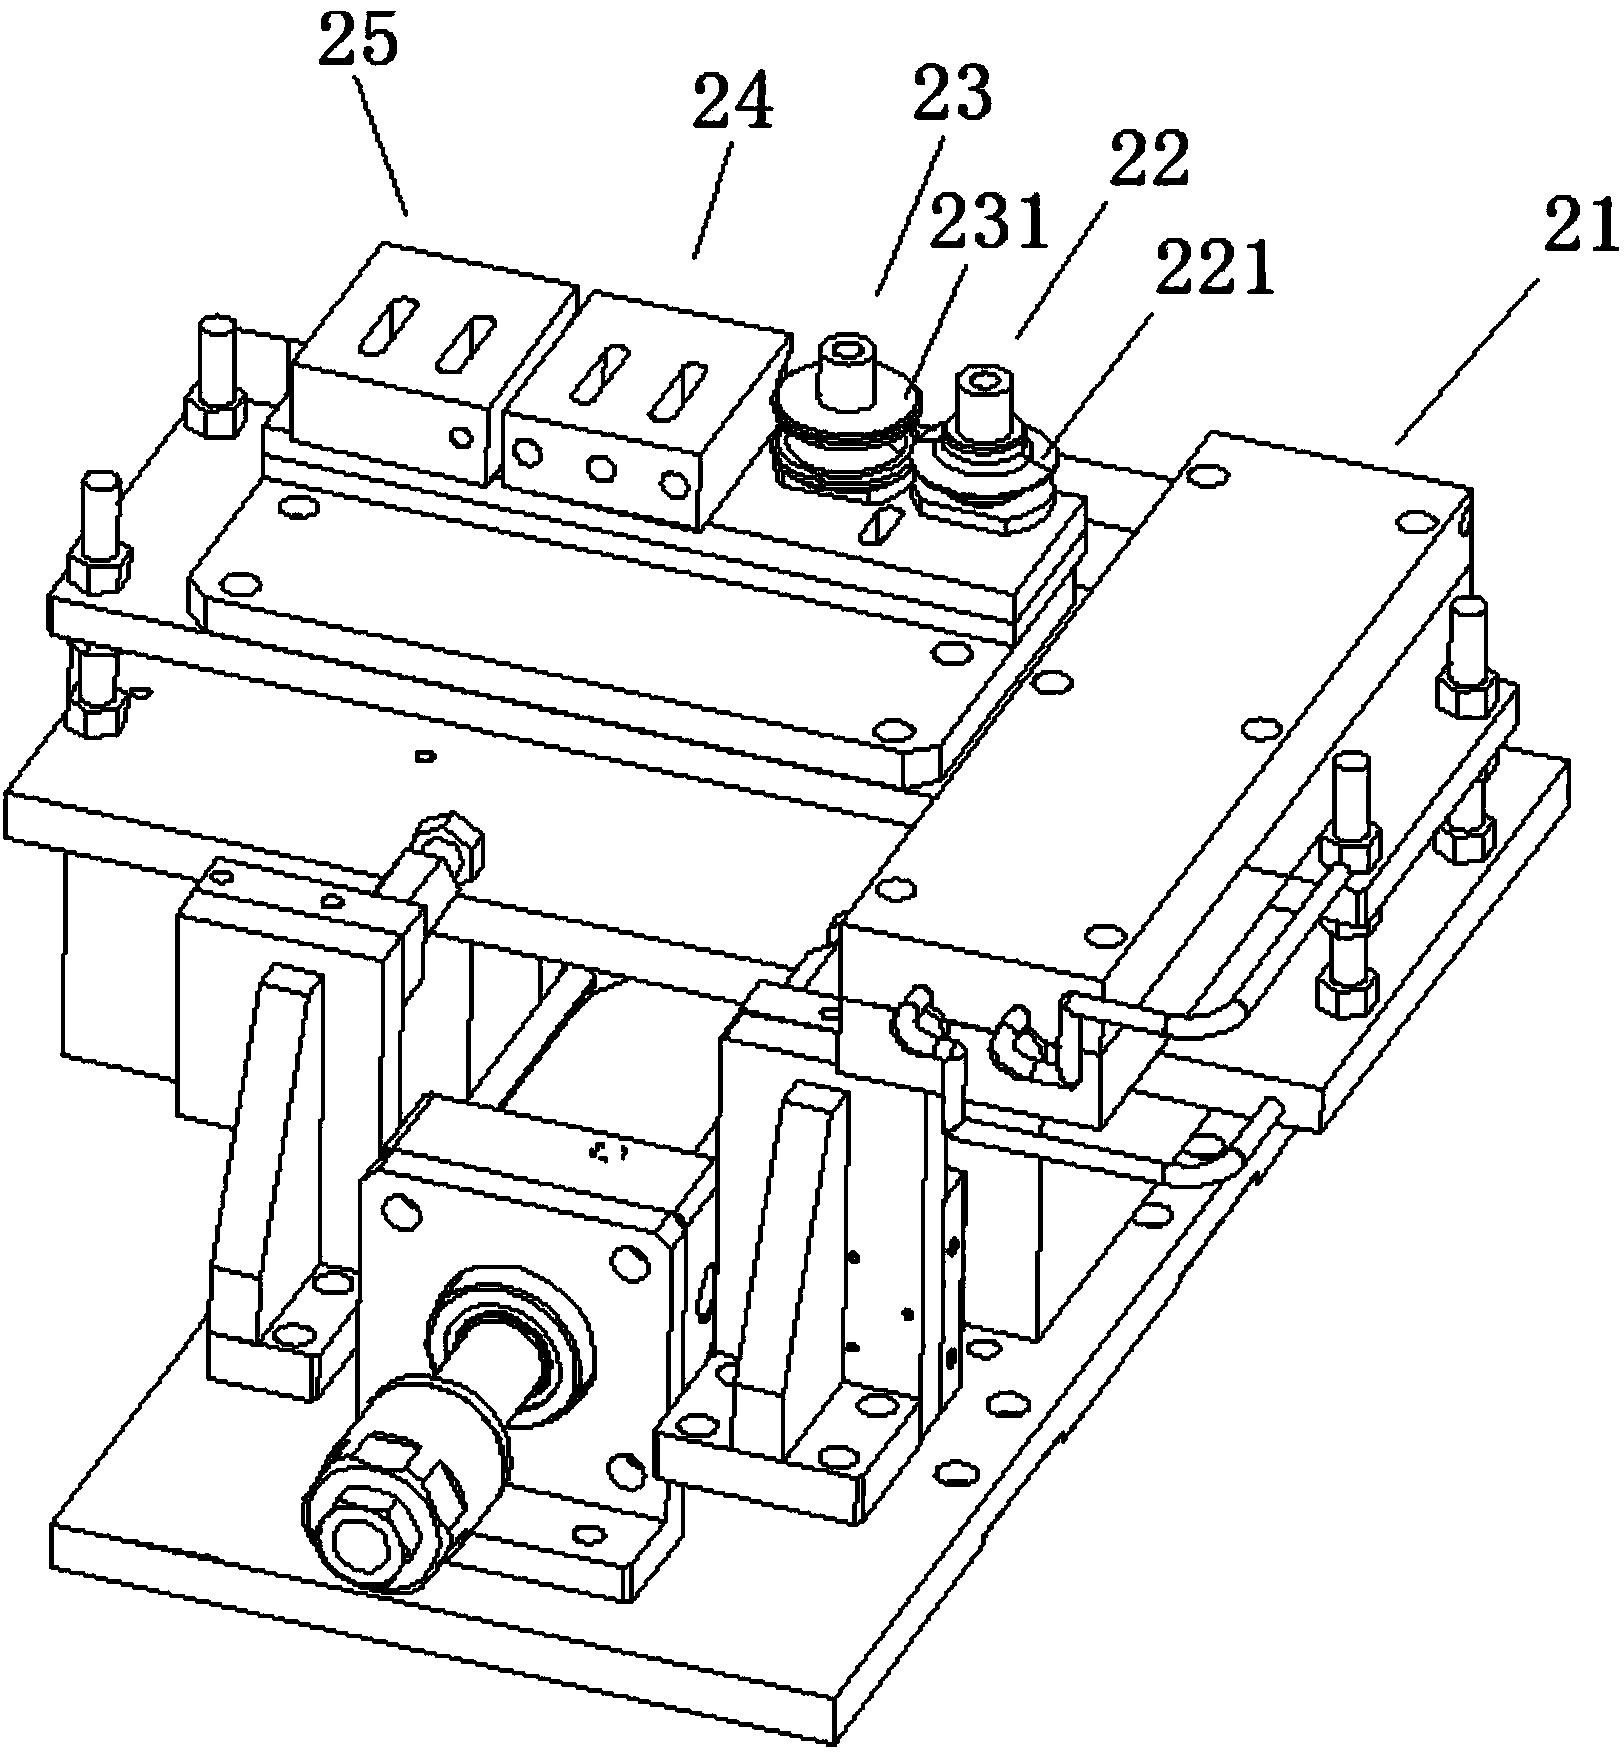 Hollow plate edge bonding forming system